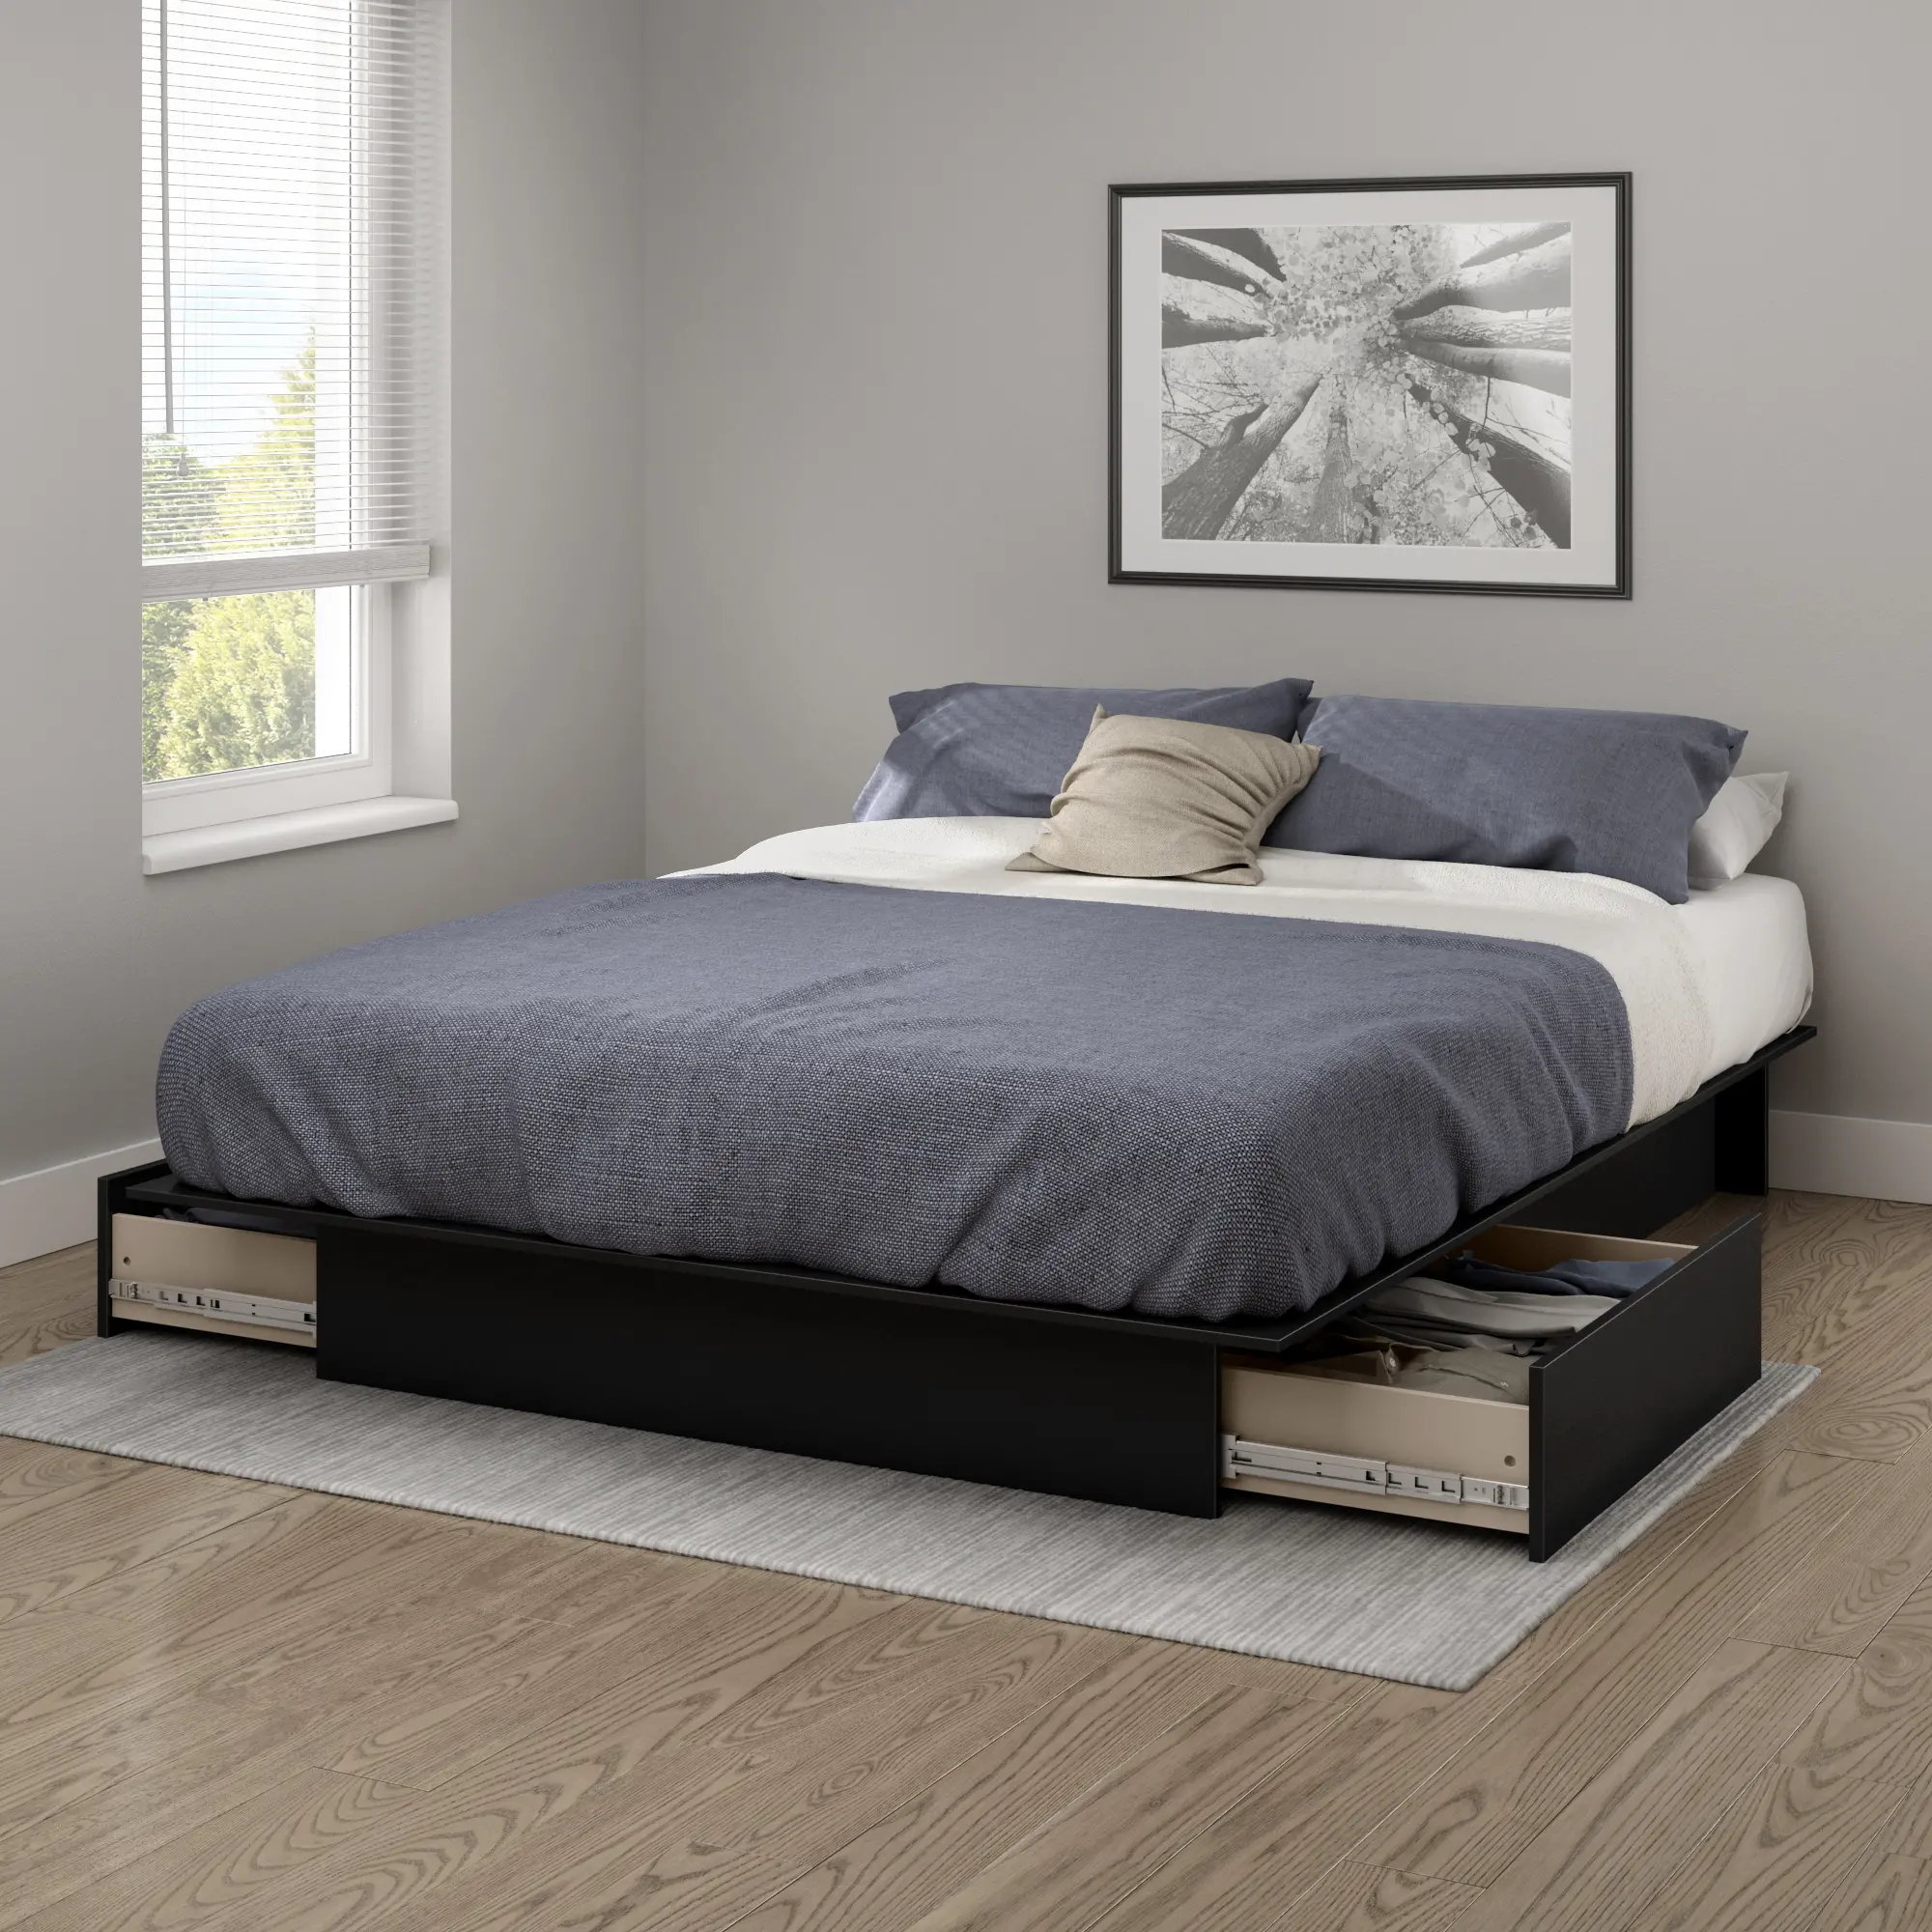 Gramercy Black Full/Queen Platform Bed with Drawers - South Shore